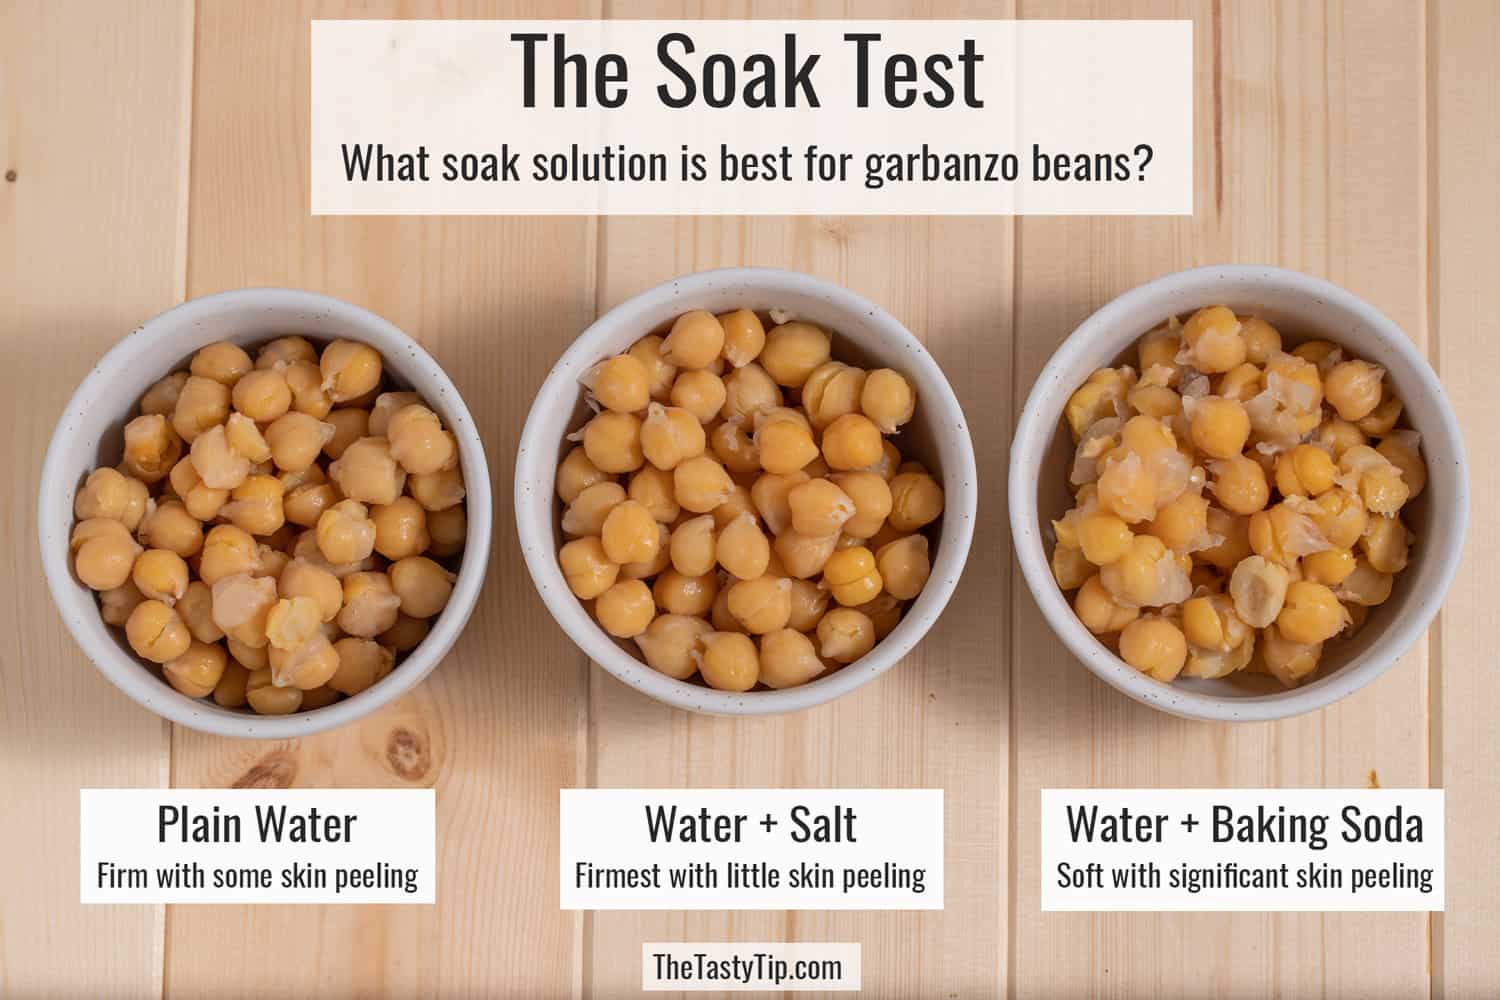 comparing 3 bowls of chickpeas soaked in plain water, salt water, and baking soda water